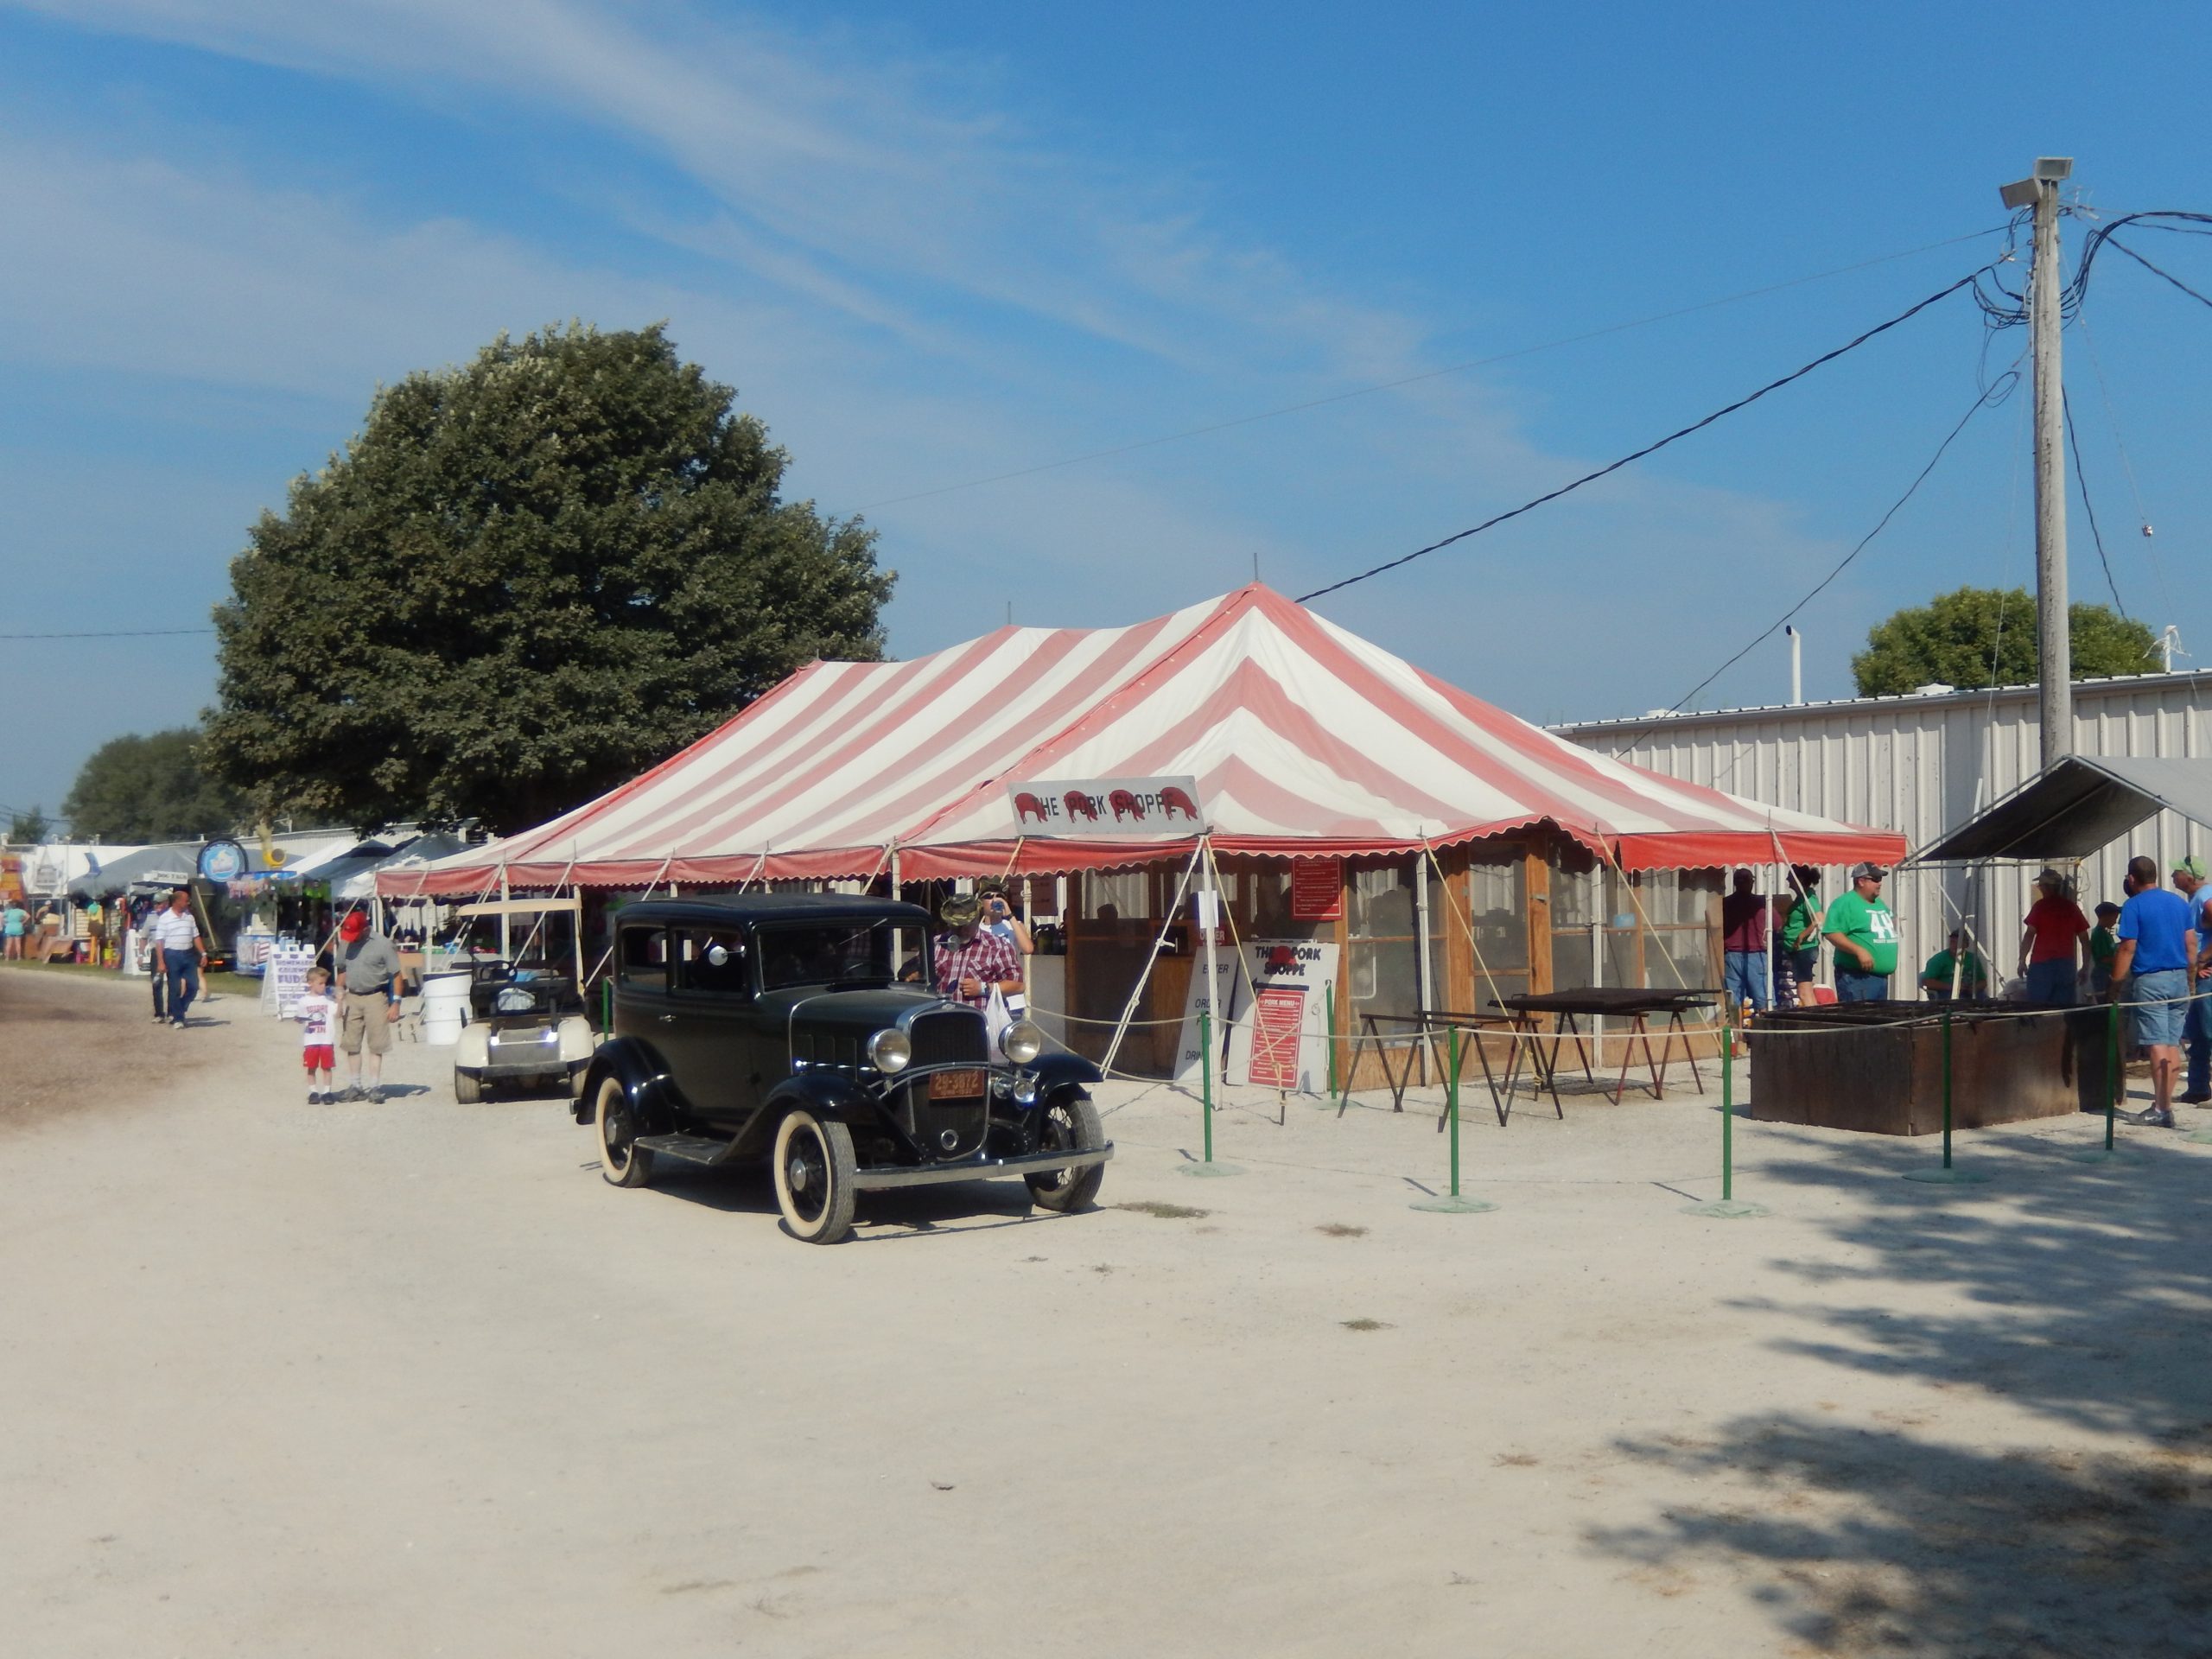 30′ x 60′ Red & white (rope and pole) tent used for food service